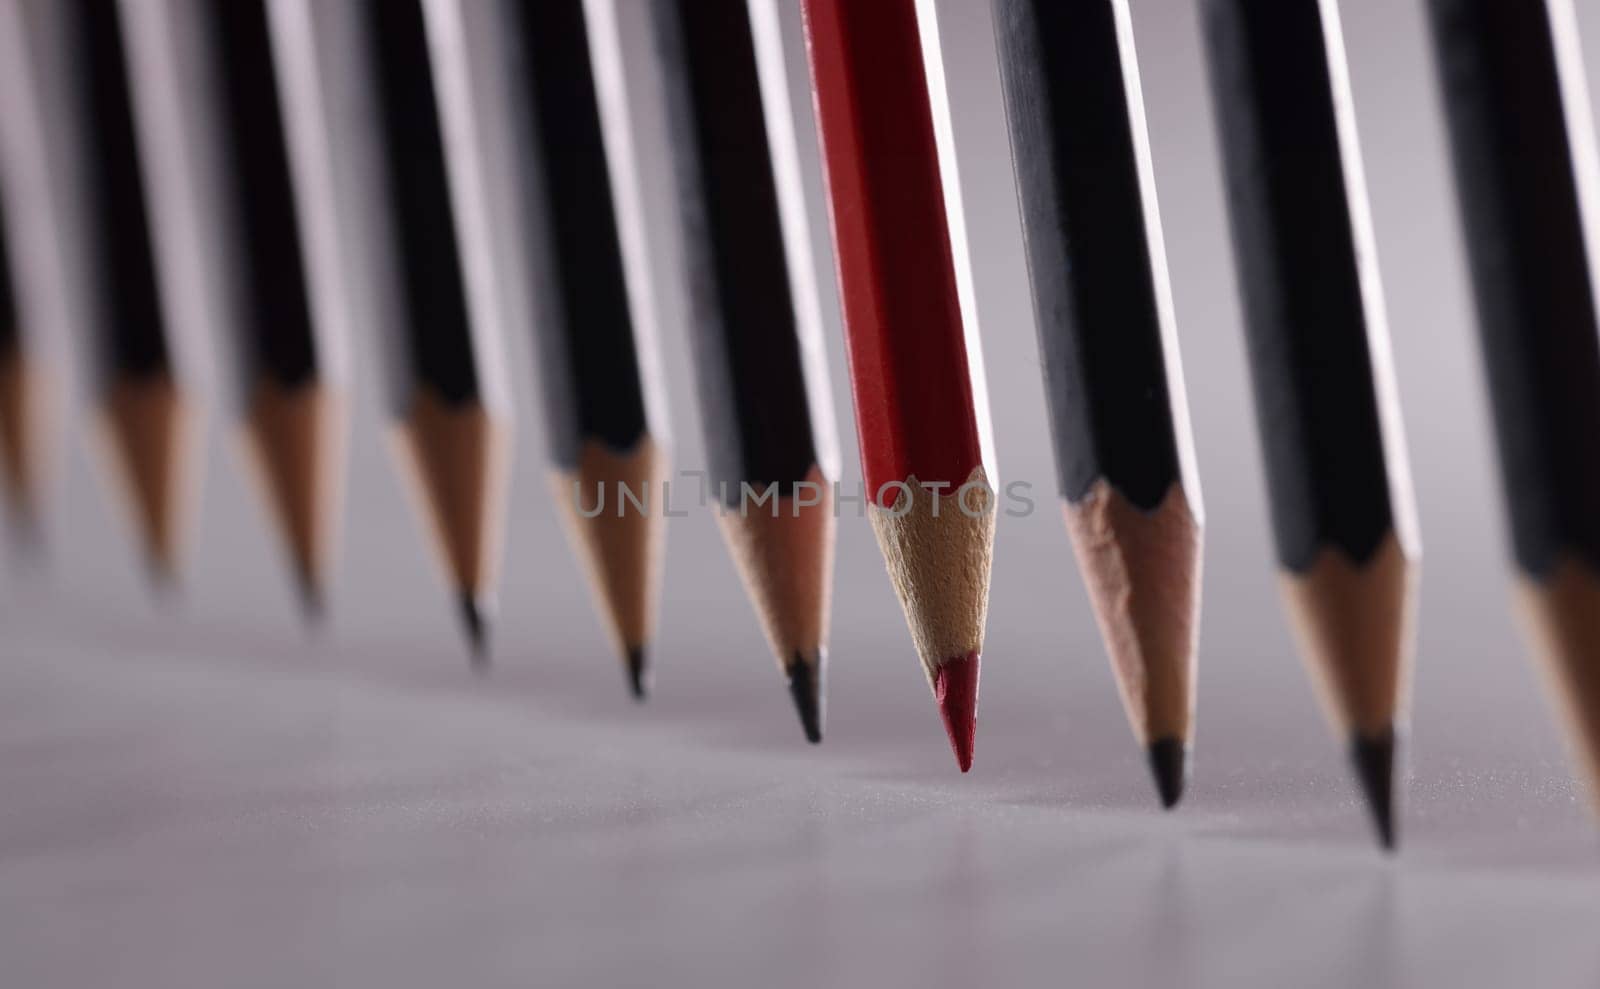 Black pencils in the center with red. by kuprevich